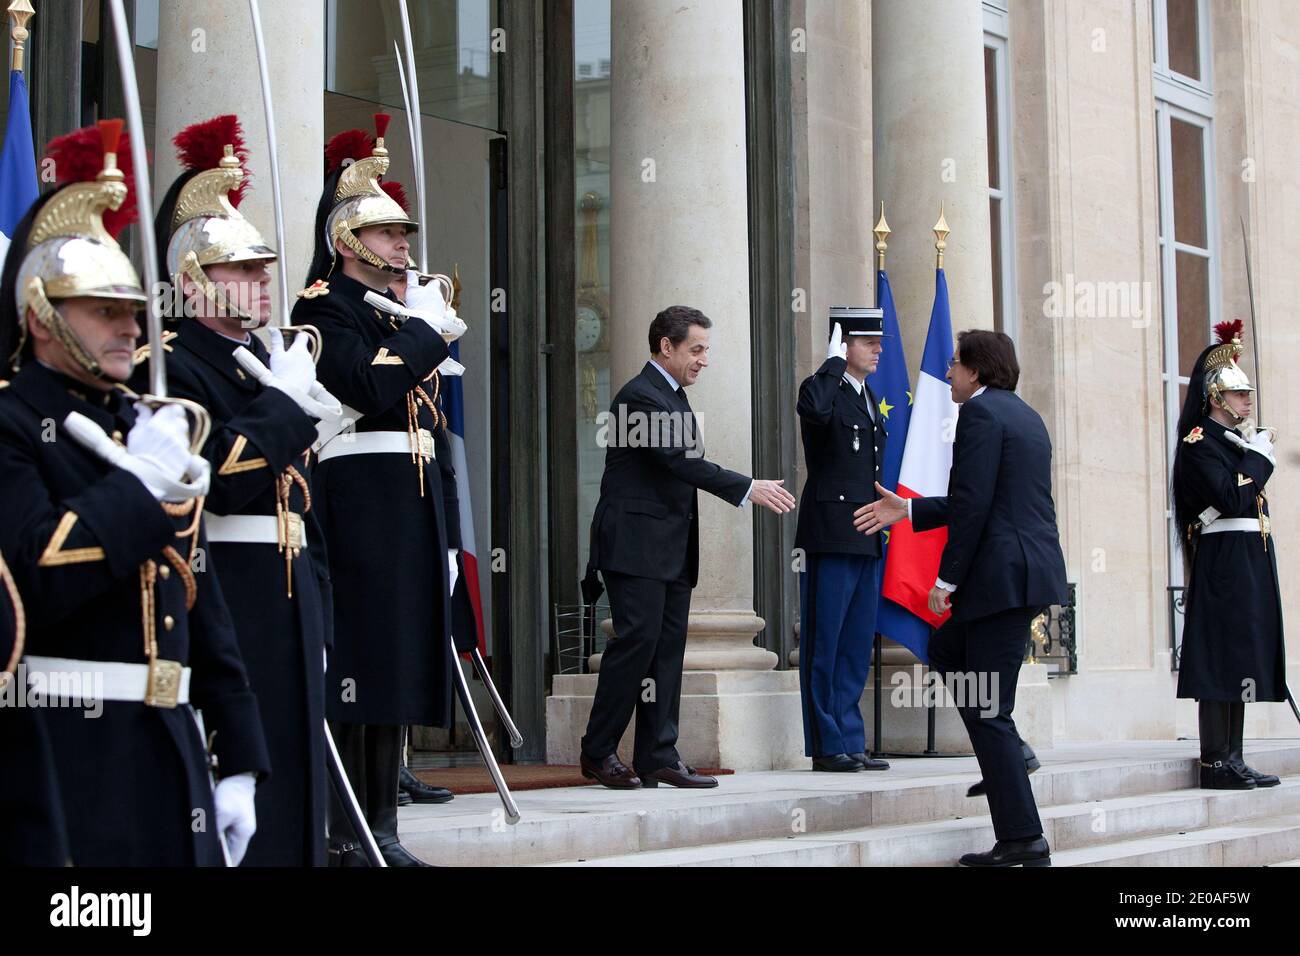 French President Nicolas Sarkozy welcomes Belgium Prime Minister Elio Di Rupo prior to a meeting at the Elysee Palace, in Paris, France on February 24, 2012. Photo by Stephane Lemouton/ABACAPRESS.COM. Stock Photo